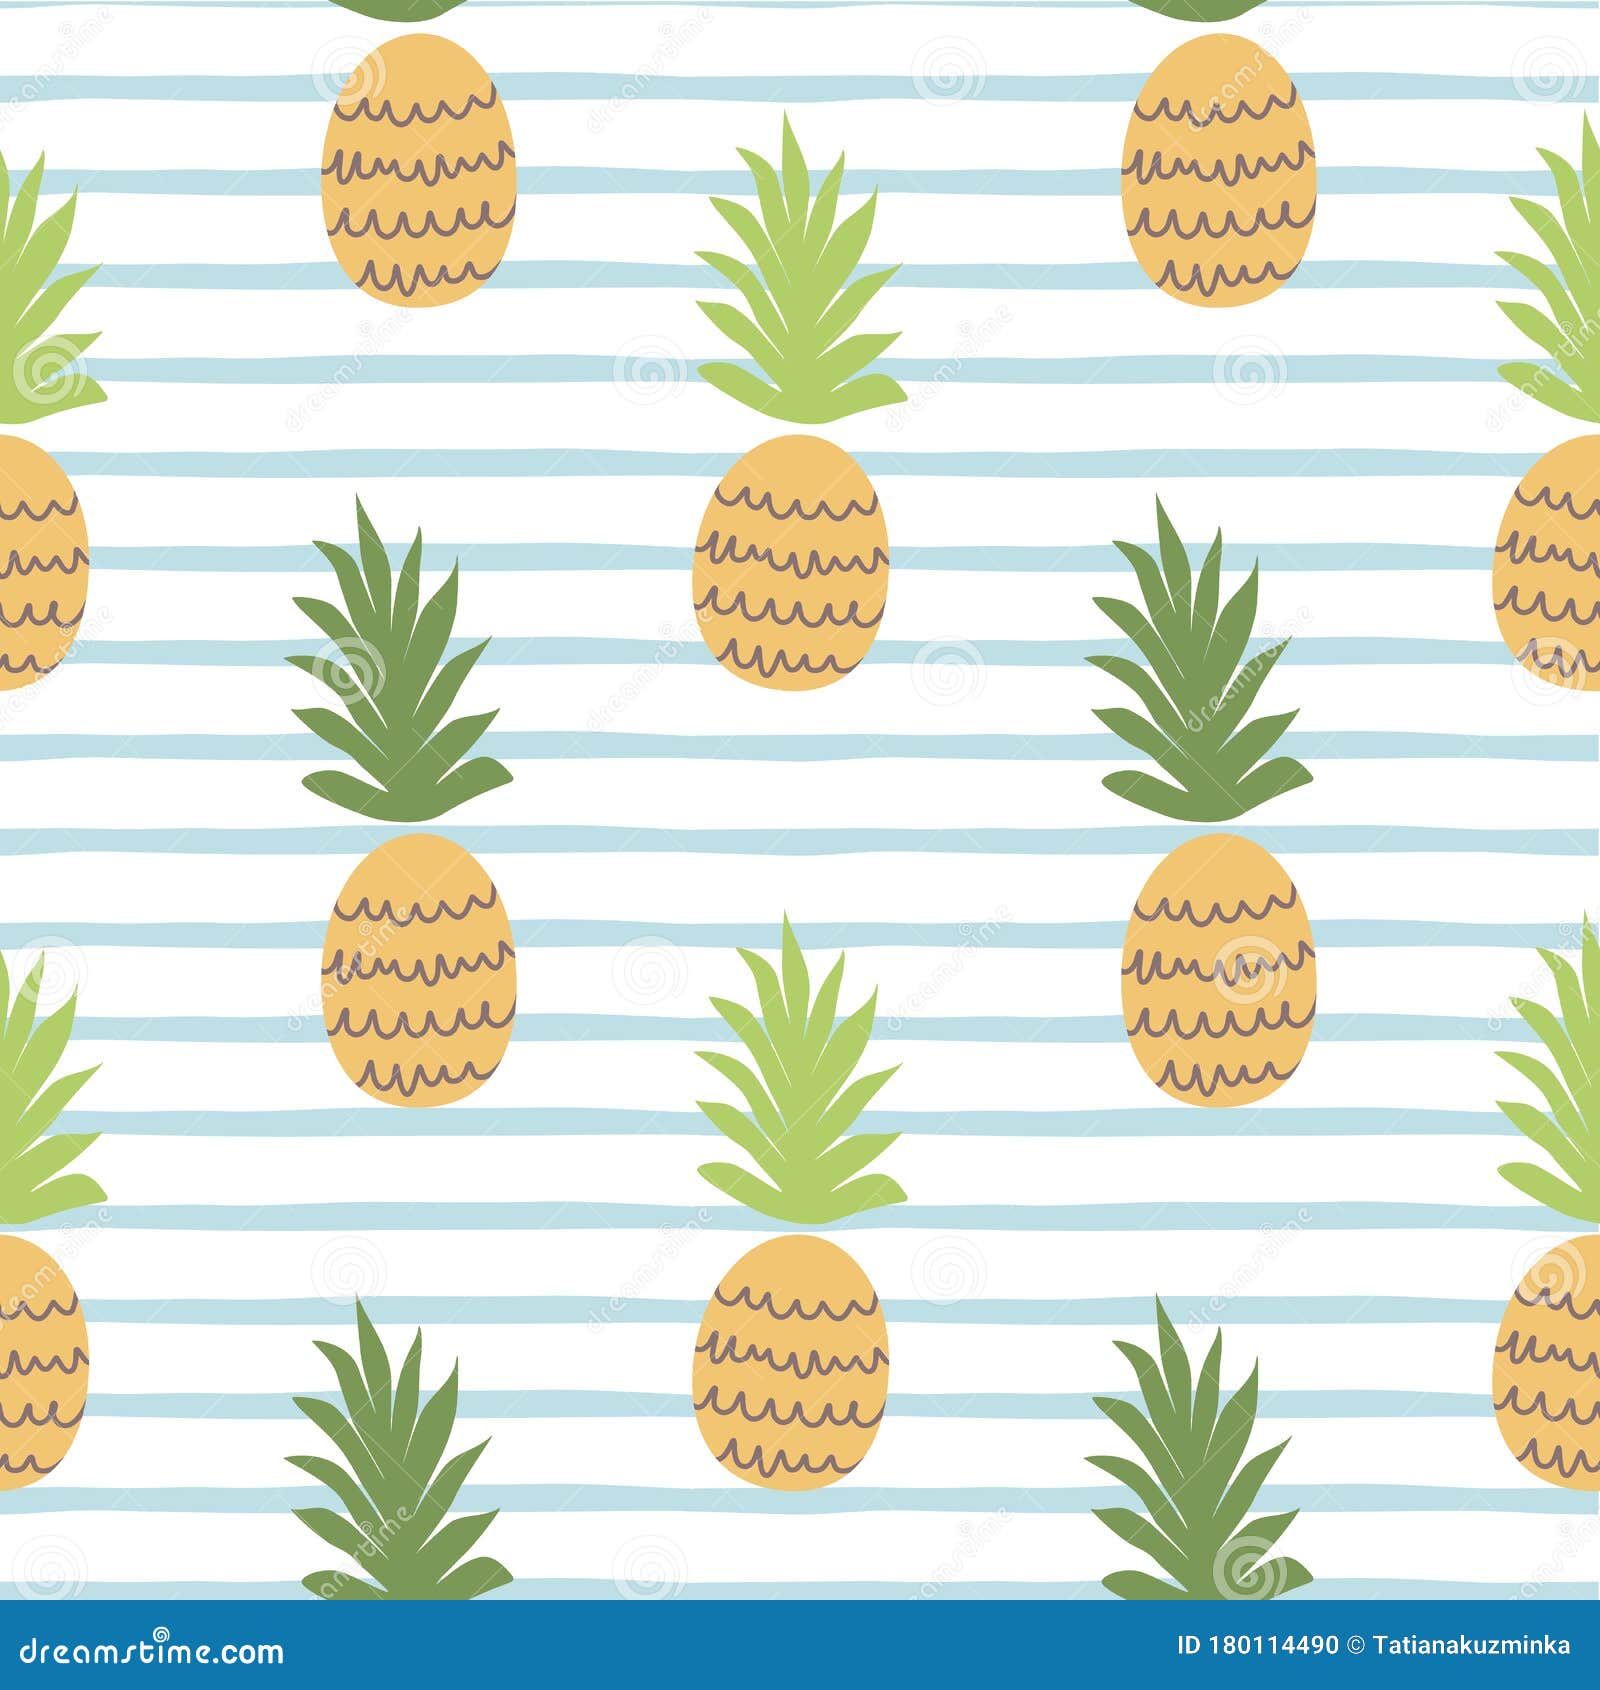 Beach Summer Pattern With Pineapple Cute Tropical Fruit On Blue Lines Seamless Background Fabric Textile Striped Design Stock Illustration Illustration Of Background Blue 180114490